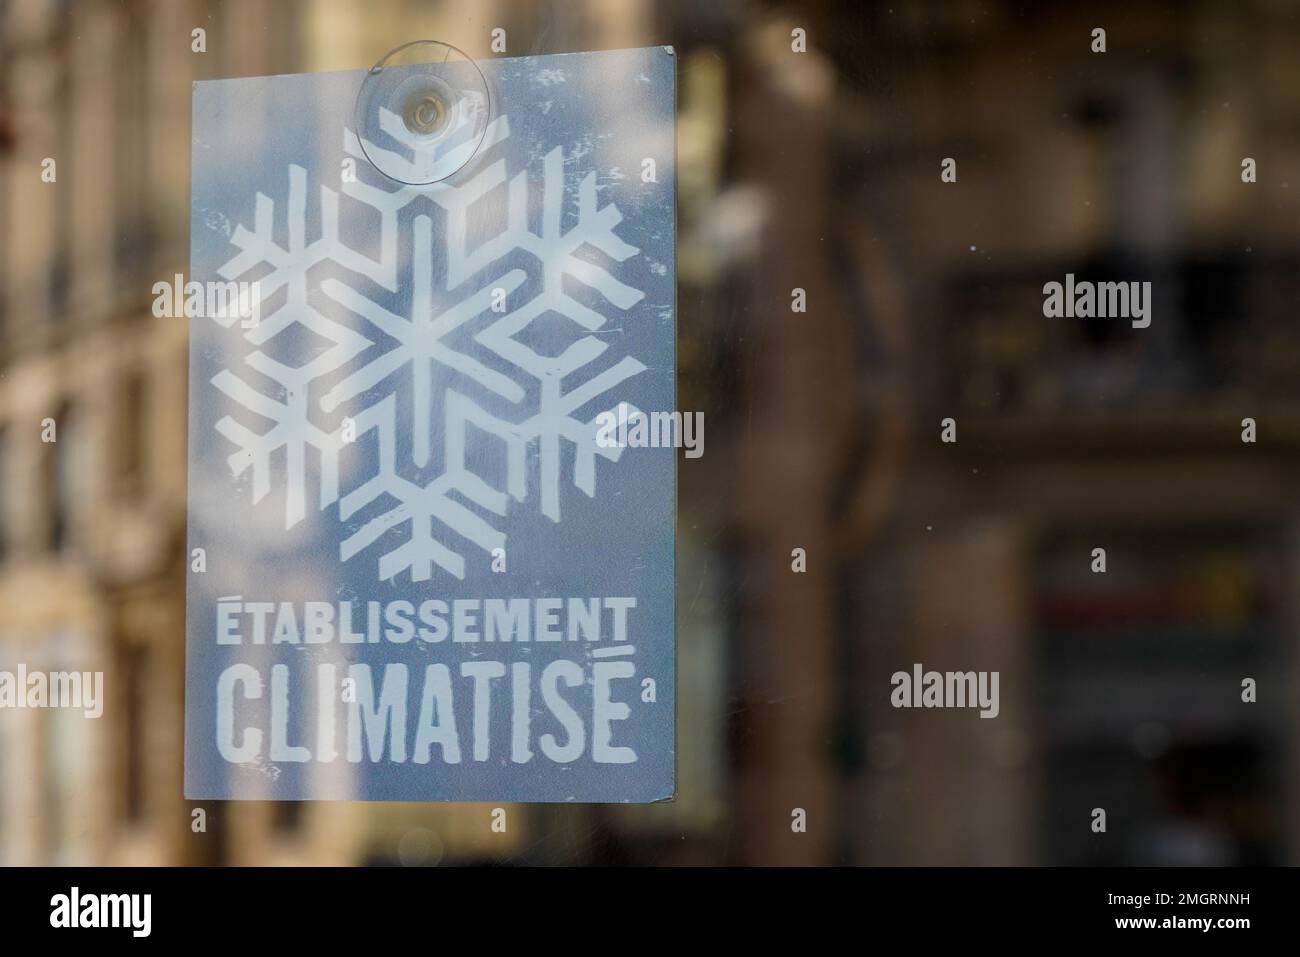 etablissement climatise french text on windows store means air-conditioned  establishment shop panel information on facade boutique Stock Photo - Alamy